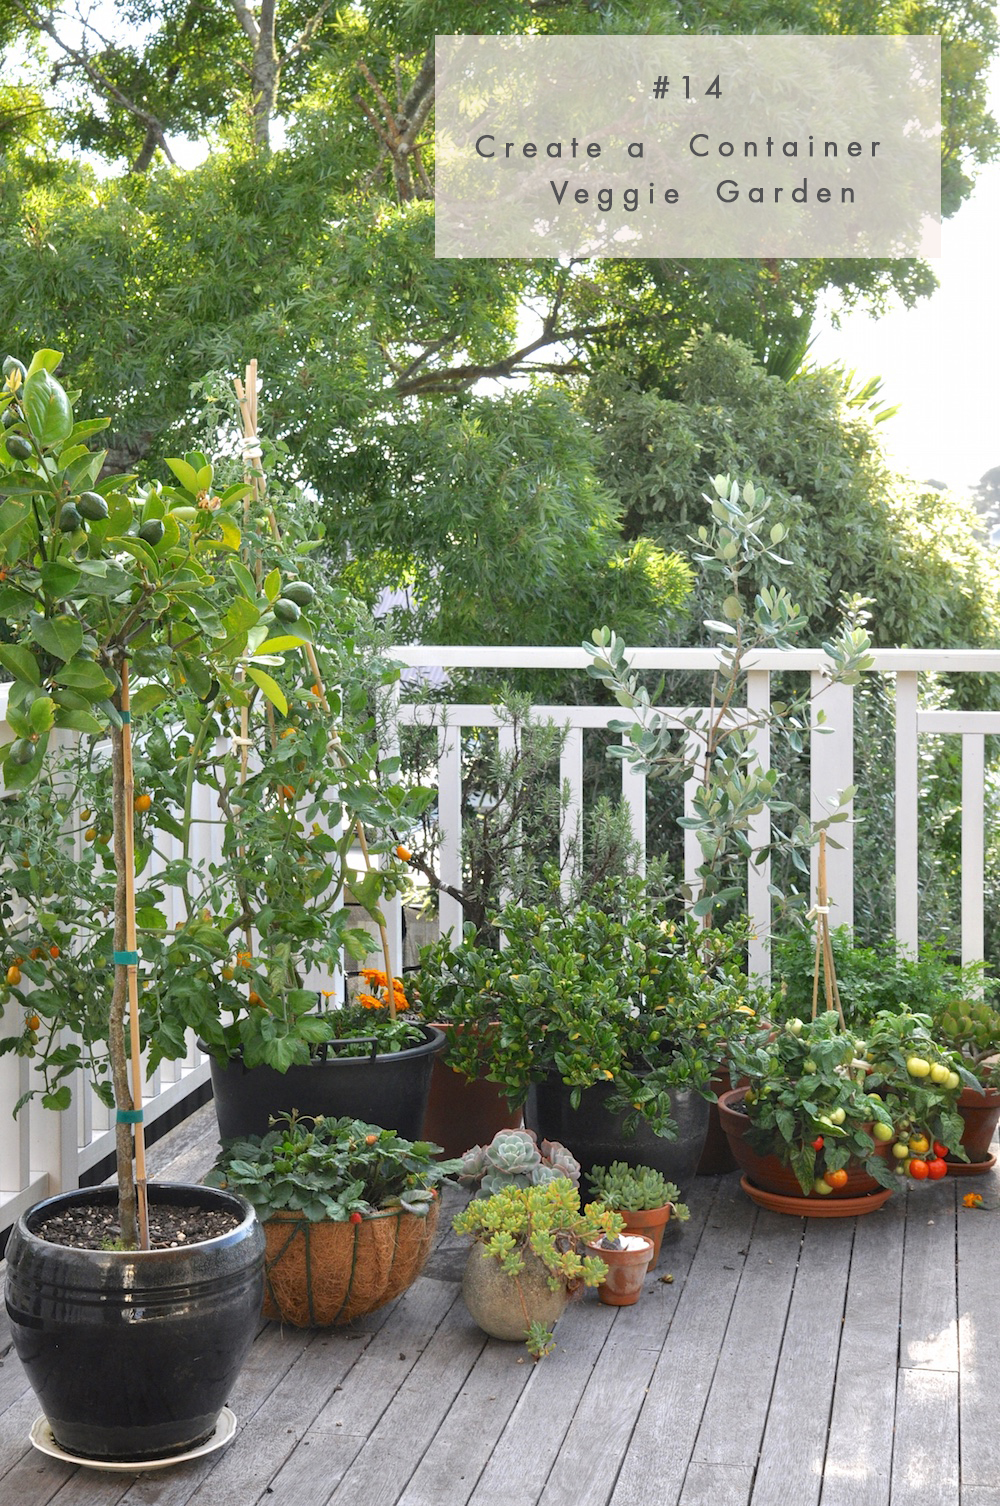 15-Ways-to-Make-a-Rental-Feel-Like-Home-#14-container-vegie-garden